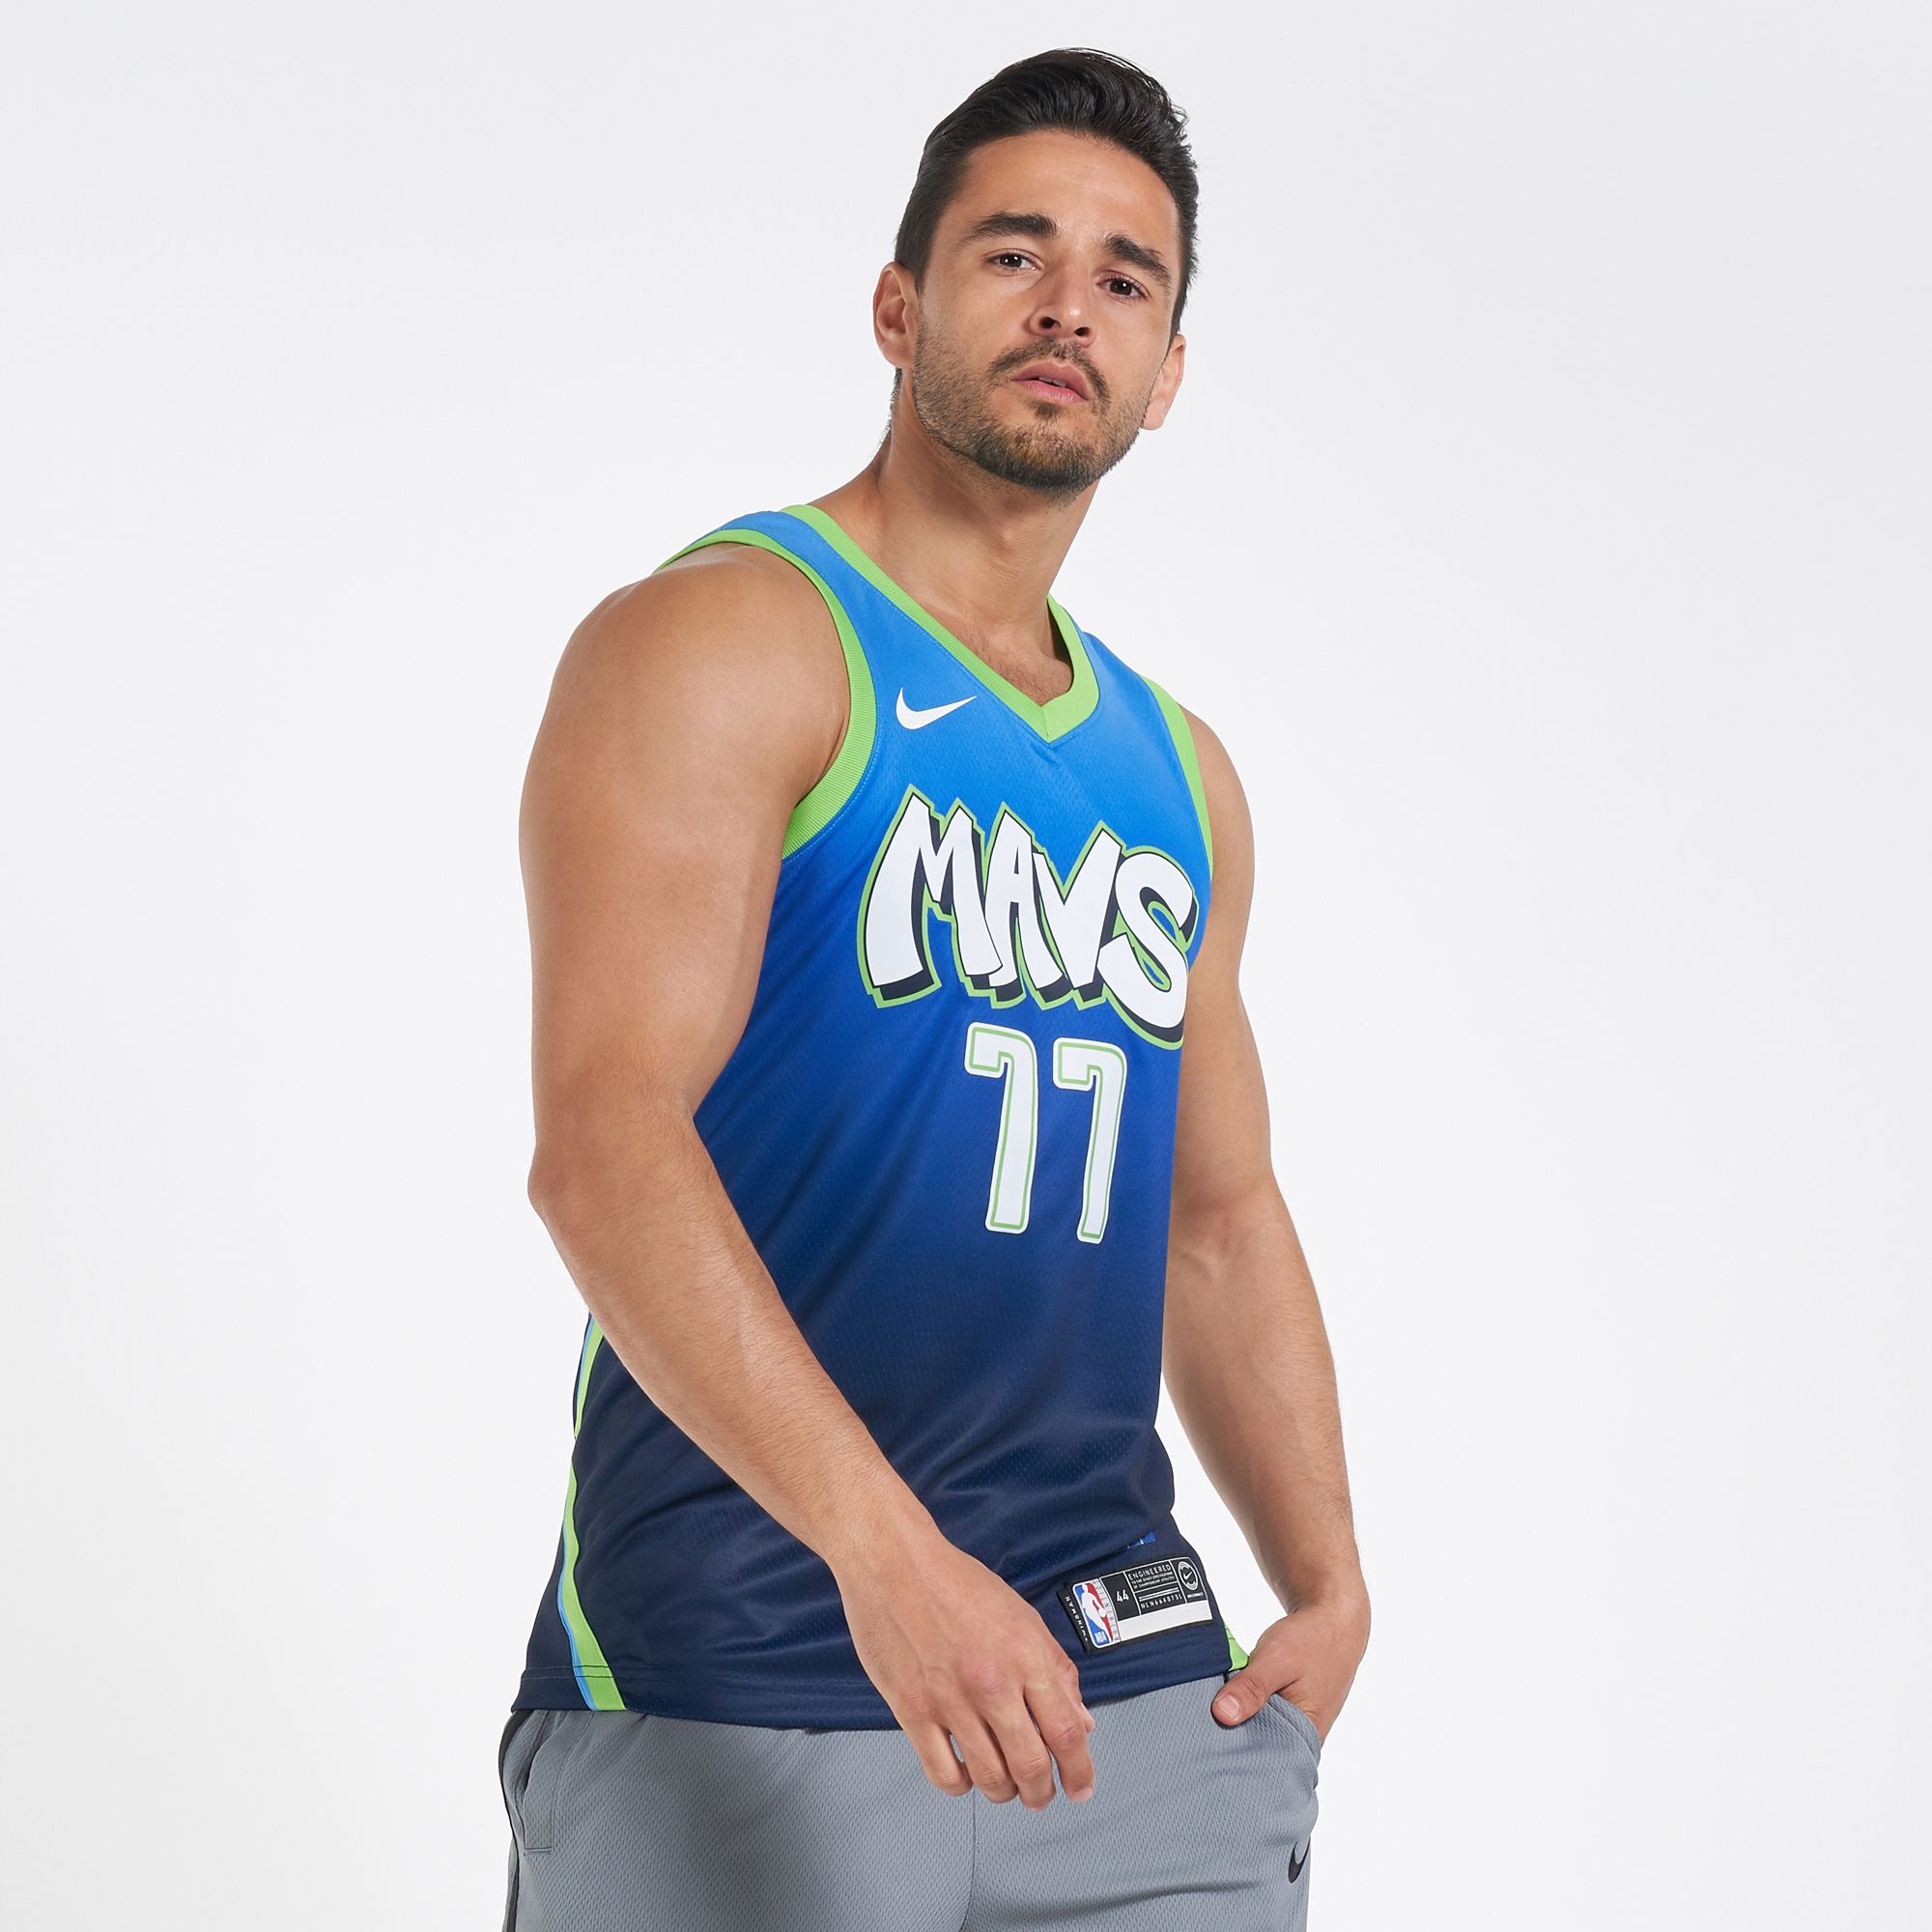 doncic city edition jersey